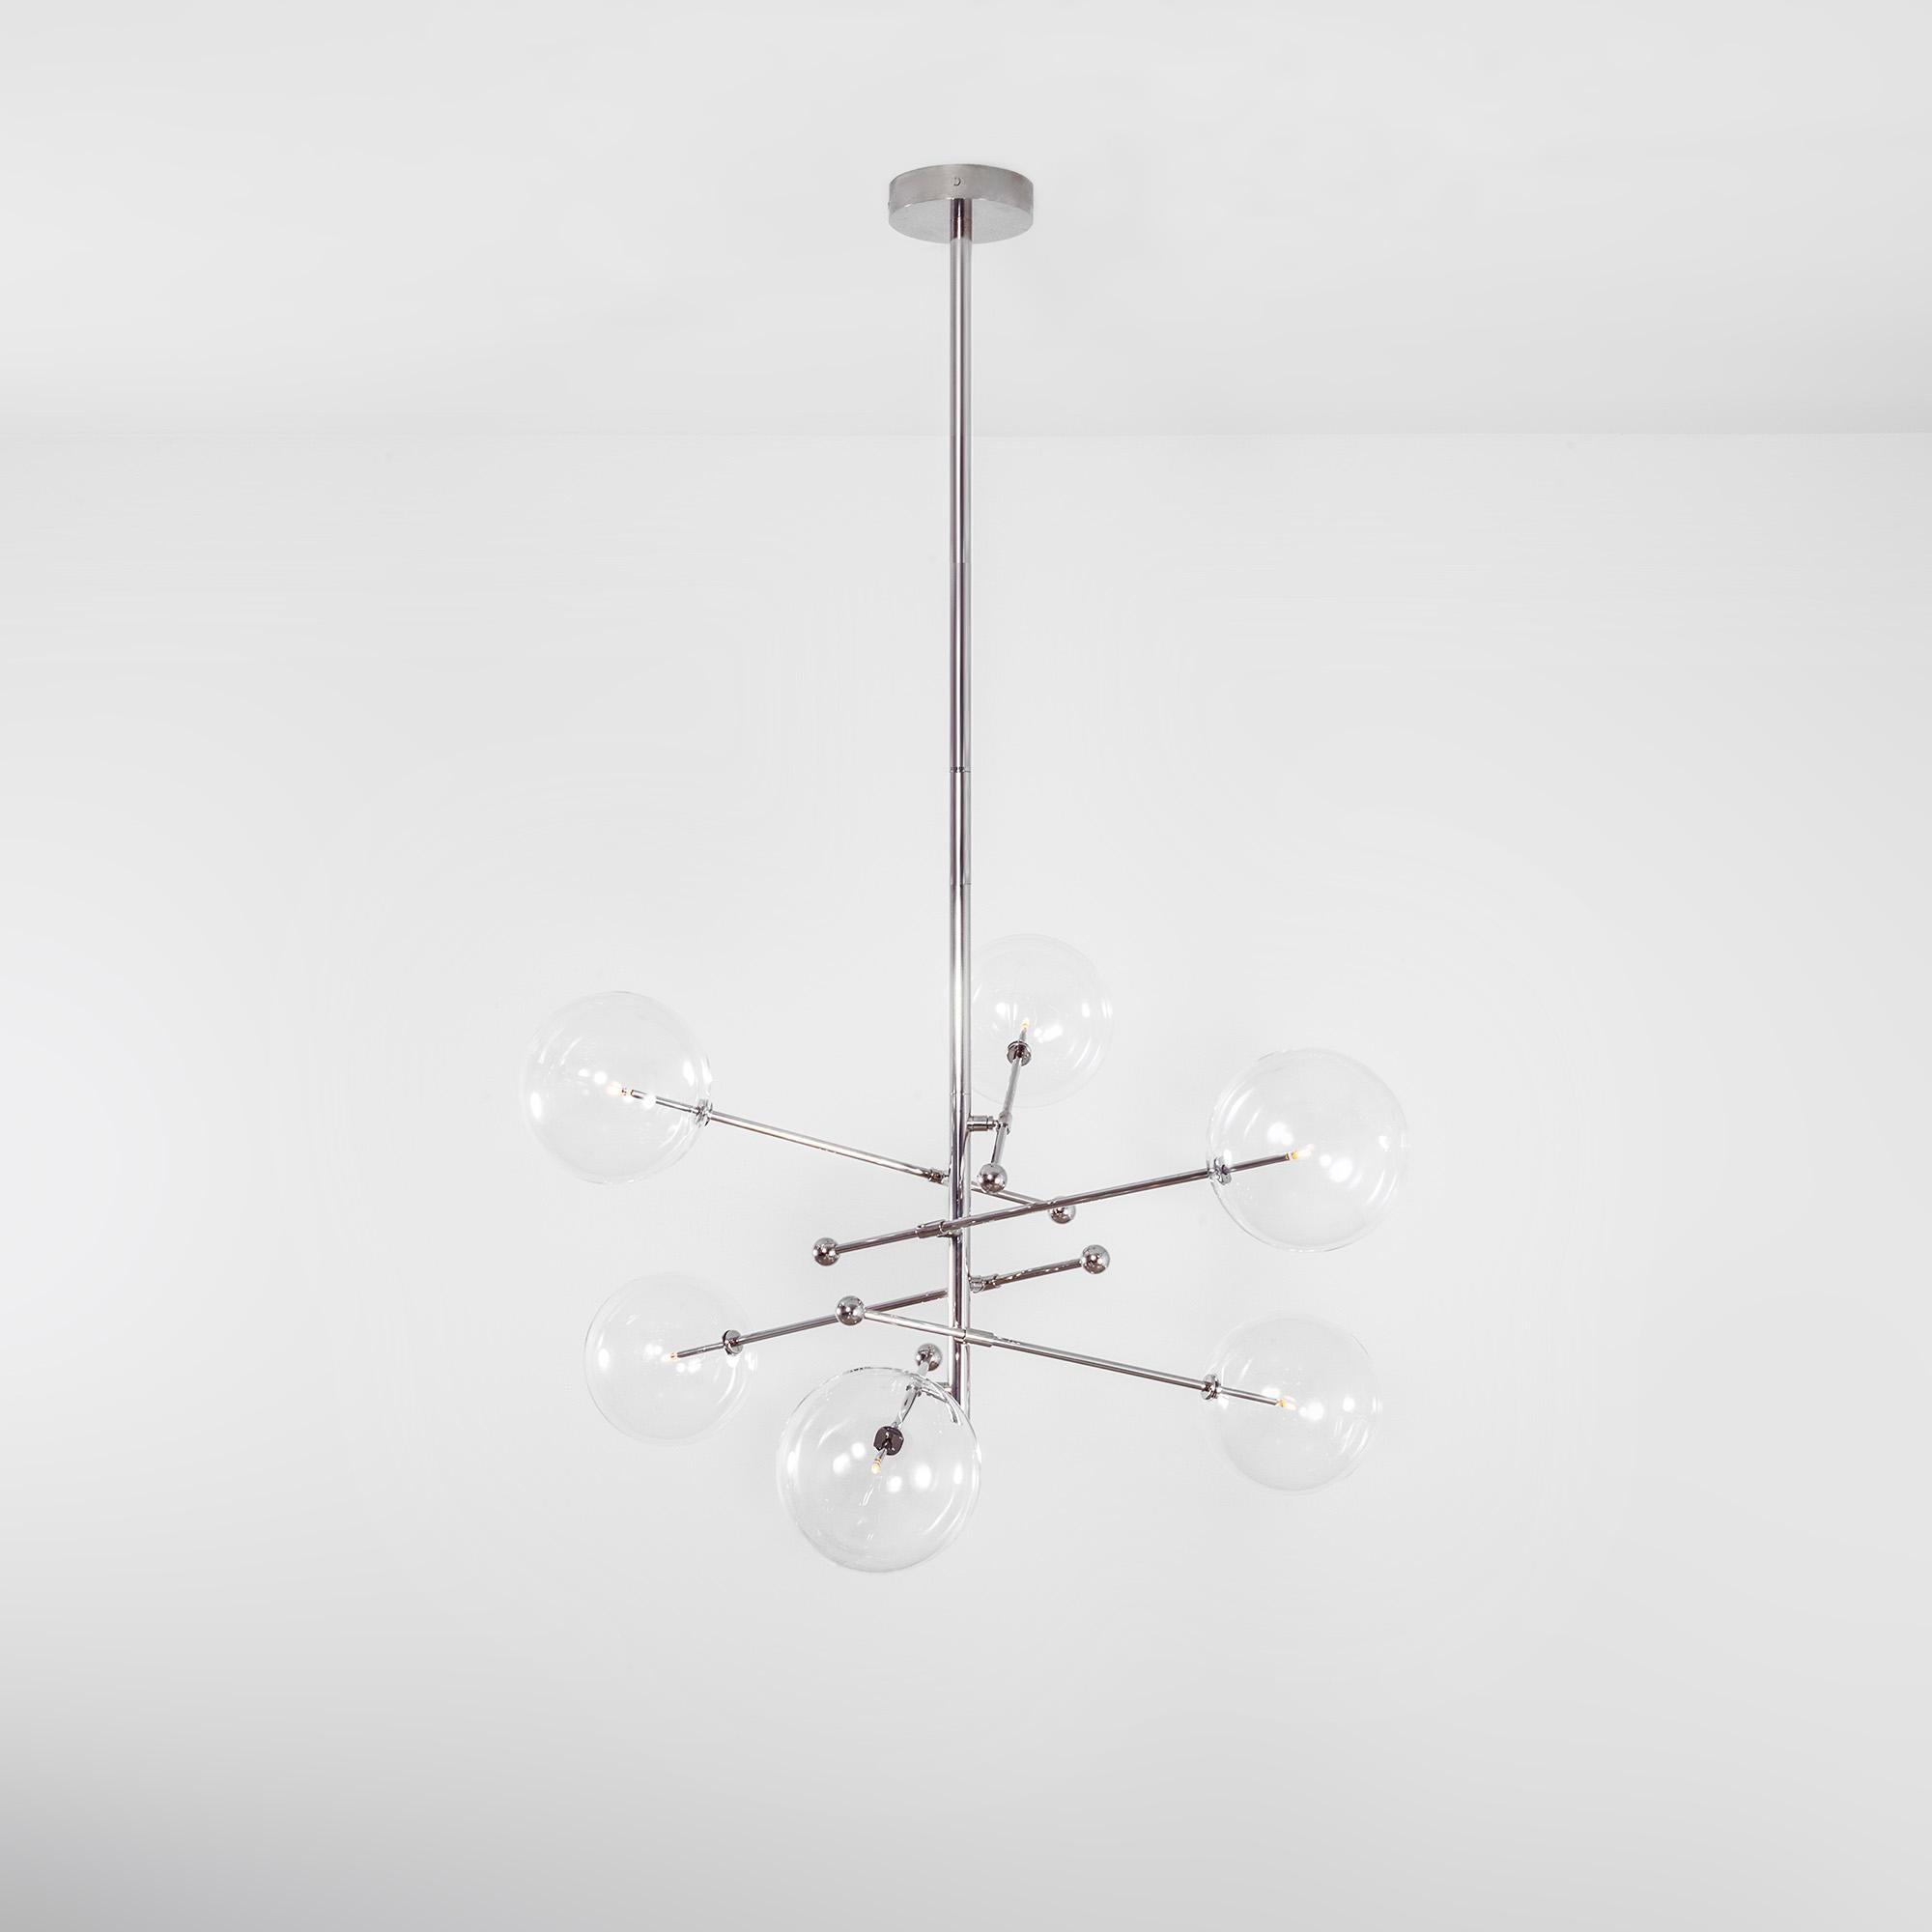 Polished Nickel 6 arm chandelier by Schwung
Dimensions: Diameter 139 x Height 165.1 cm
Materials: Solid brass, hand-blown glass globes
Finish: Polished Nickel.
Also available in finishes: Natural Brass or Black Gunmetal.
All our lamps can be